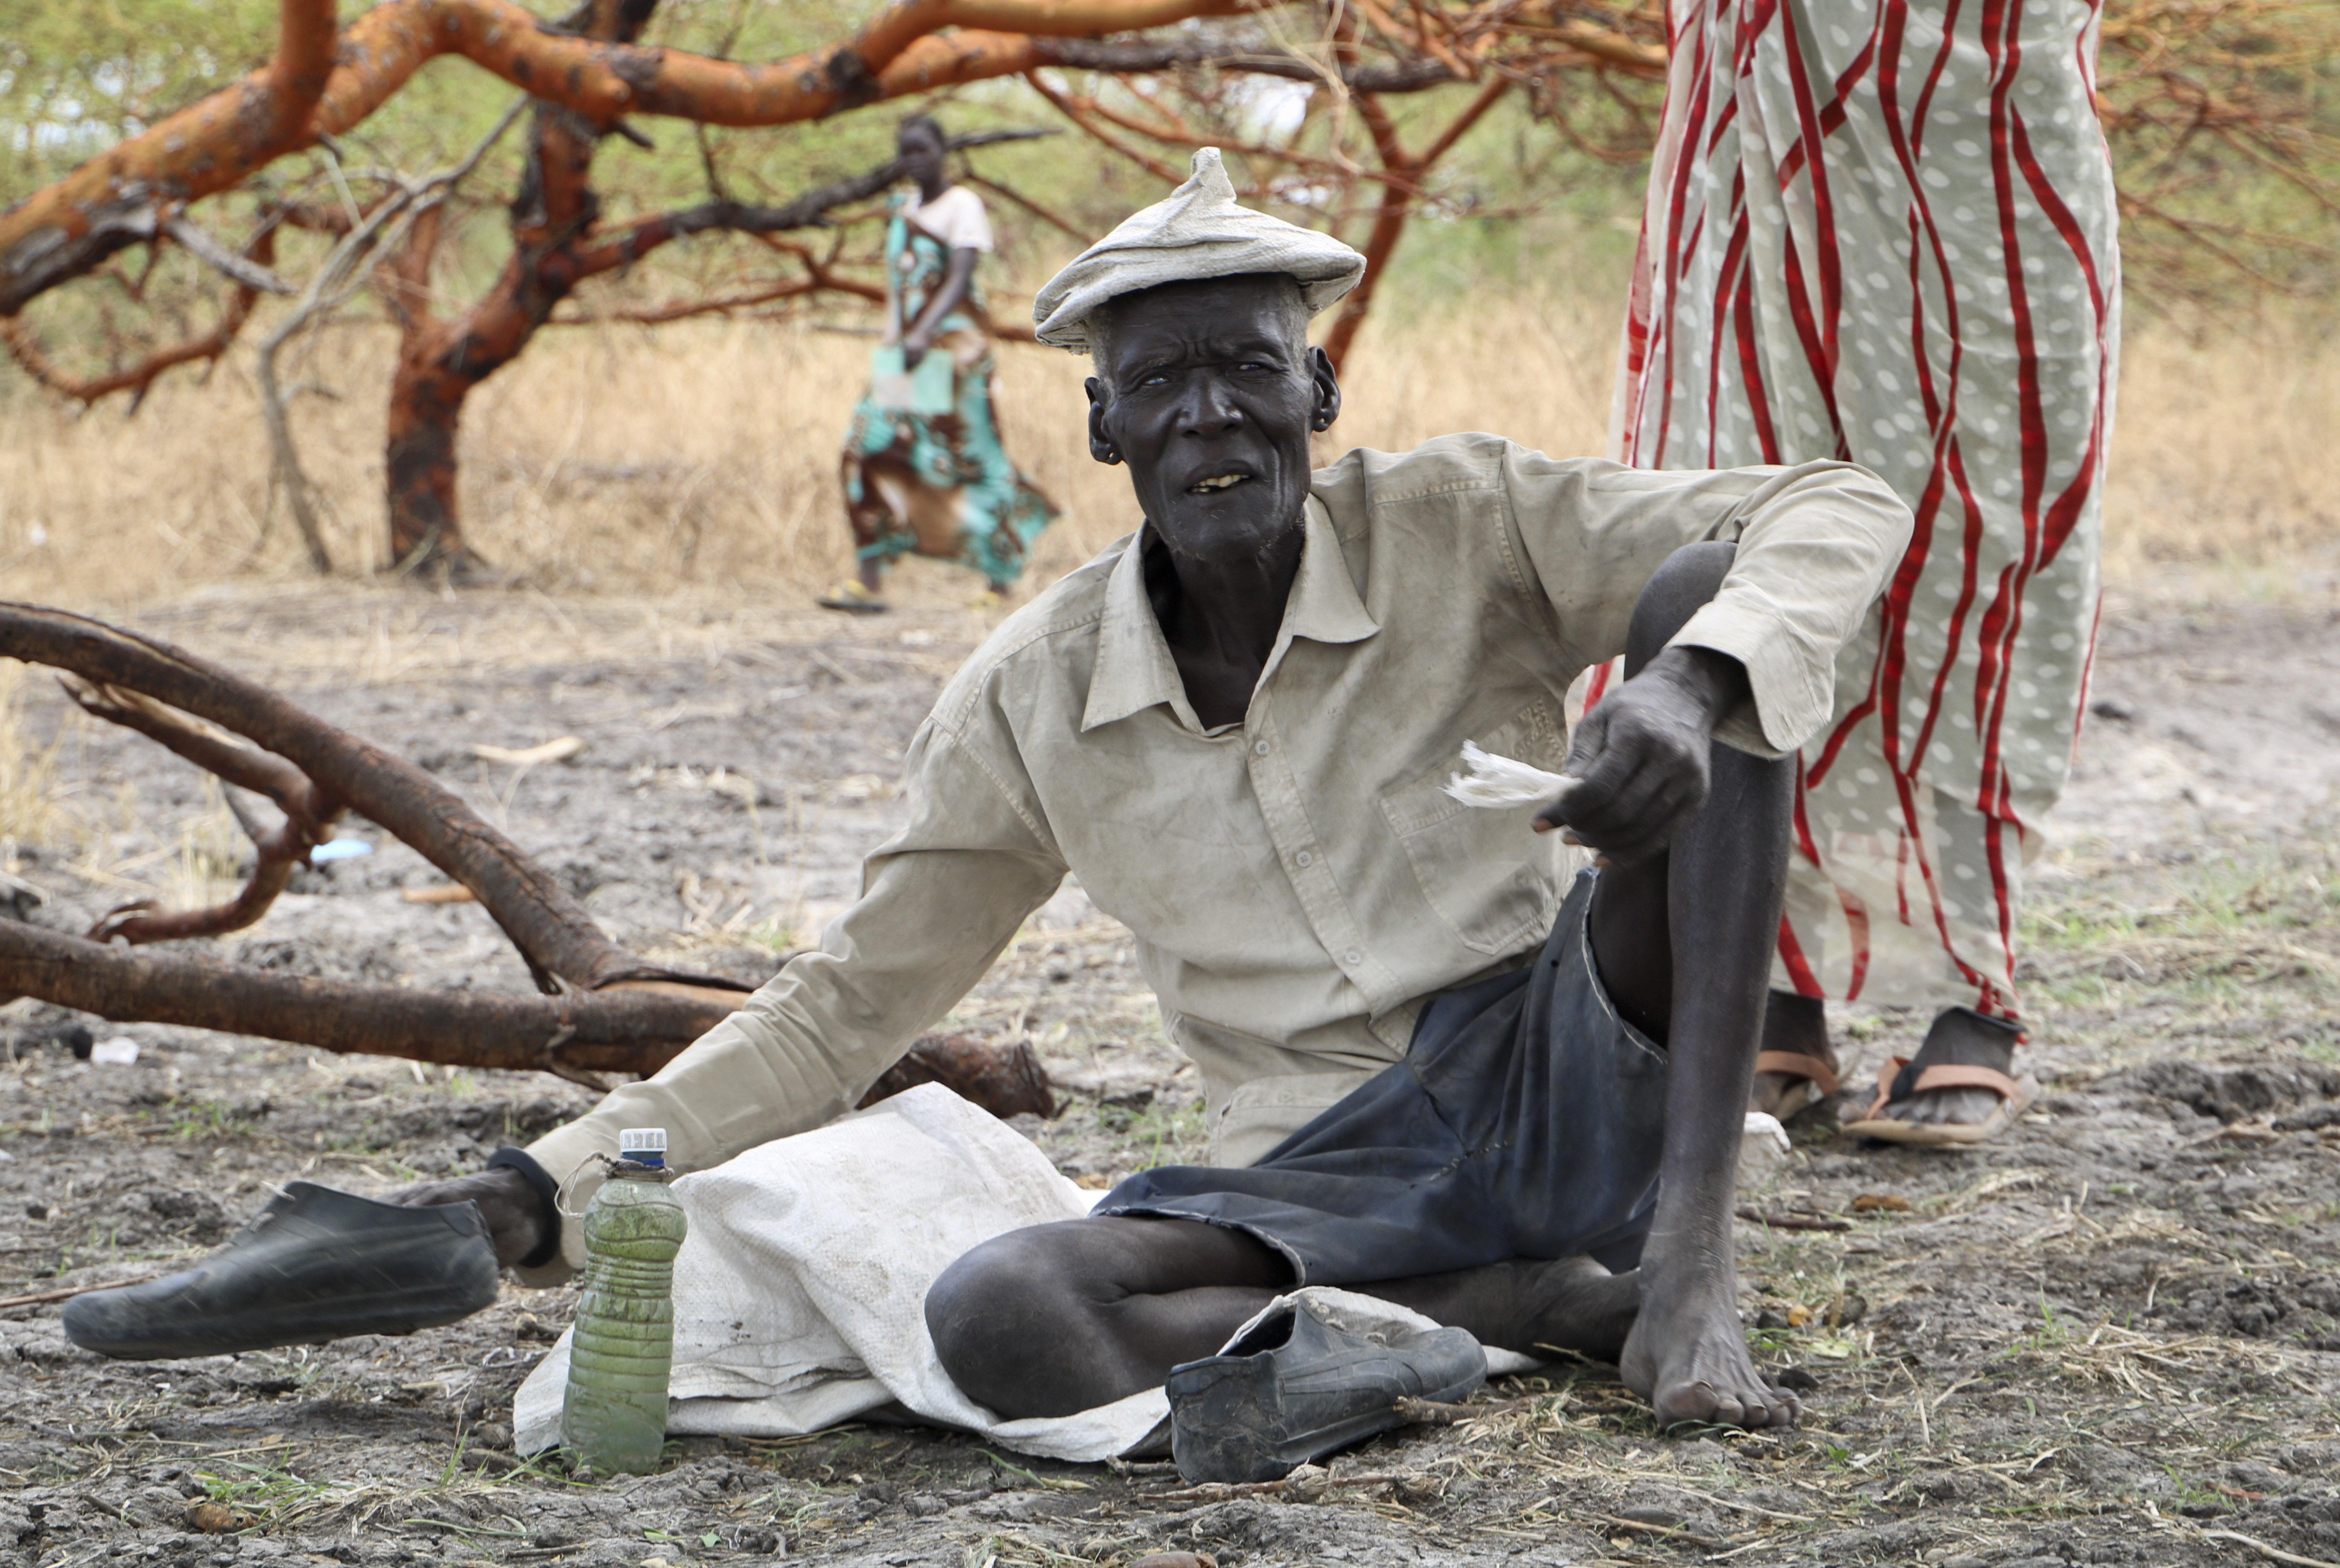 Gatdin Bol, 65, who fled fighting and now survives by eating fruit from the trees (Sam Mednick/AP)